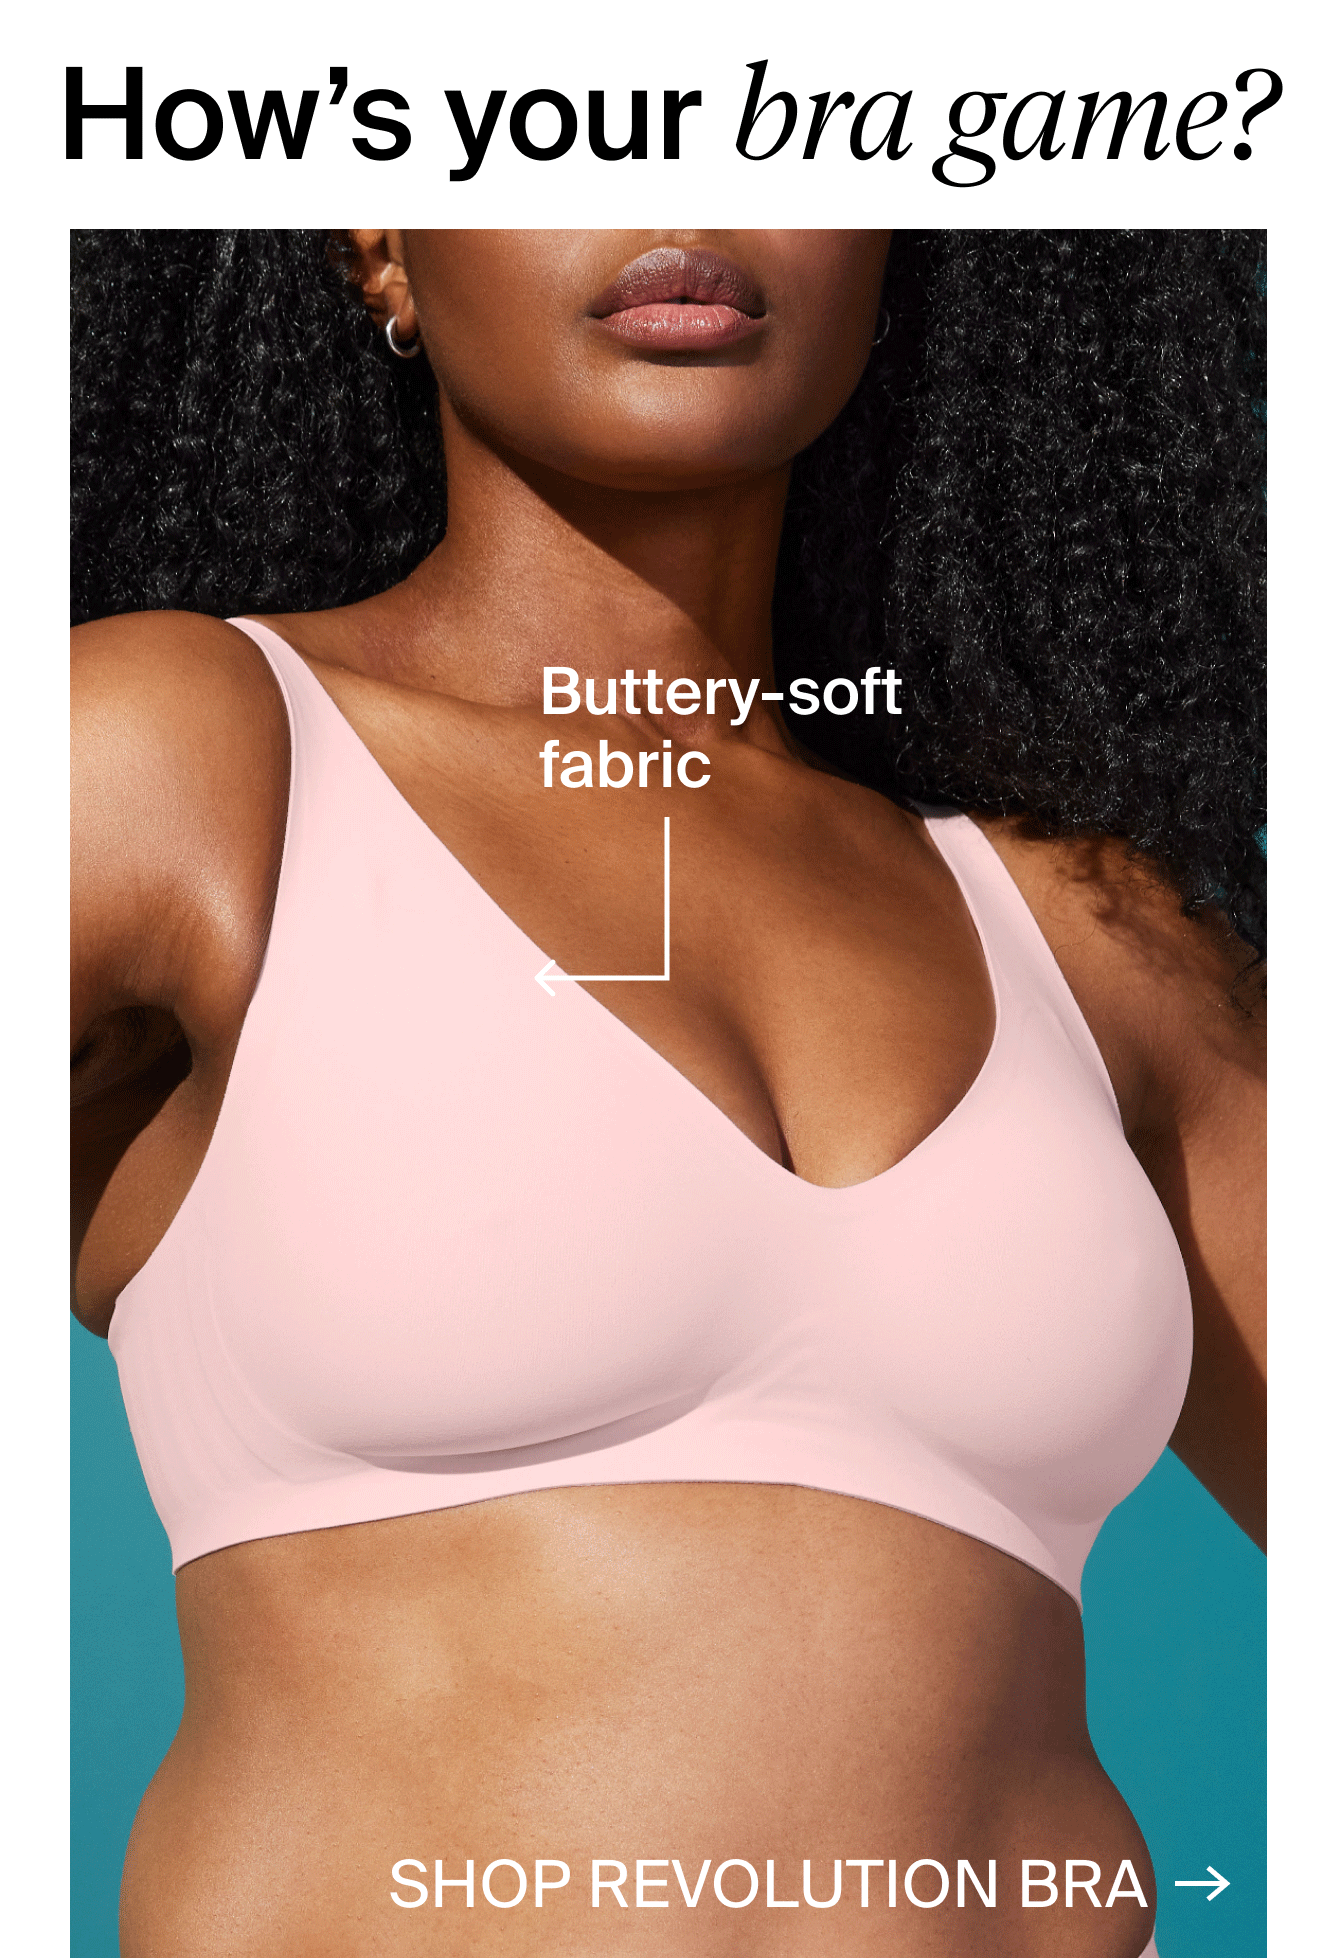 Knix CA: The bra that completely changed the game